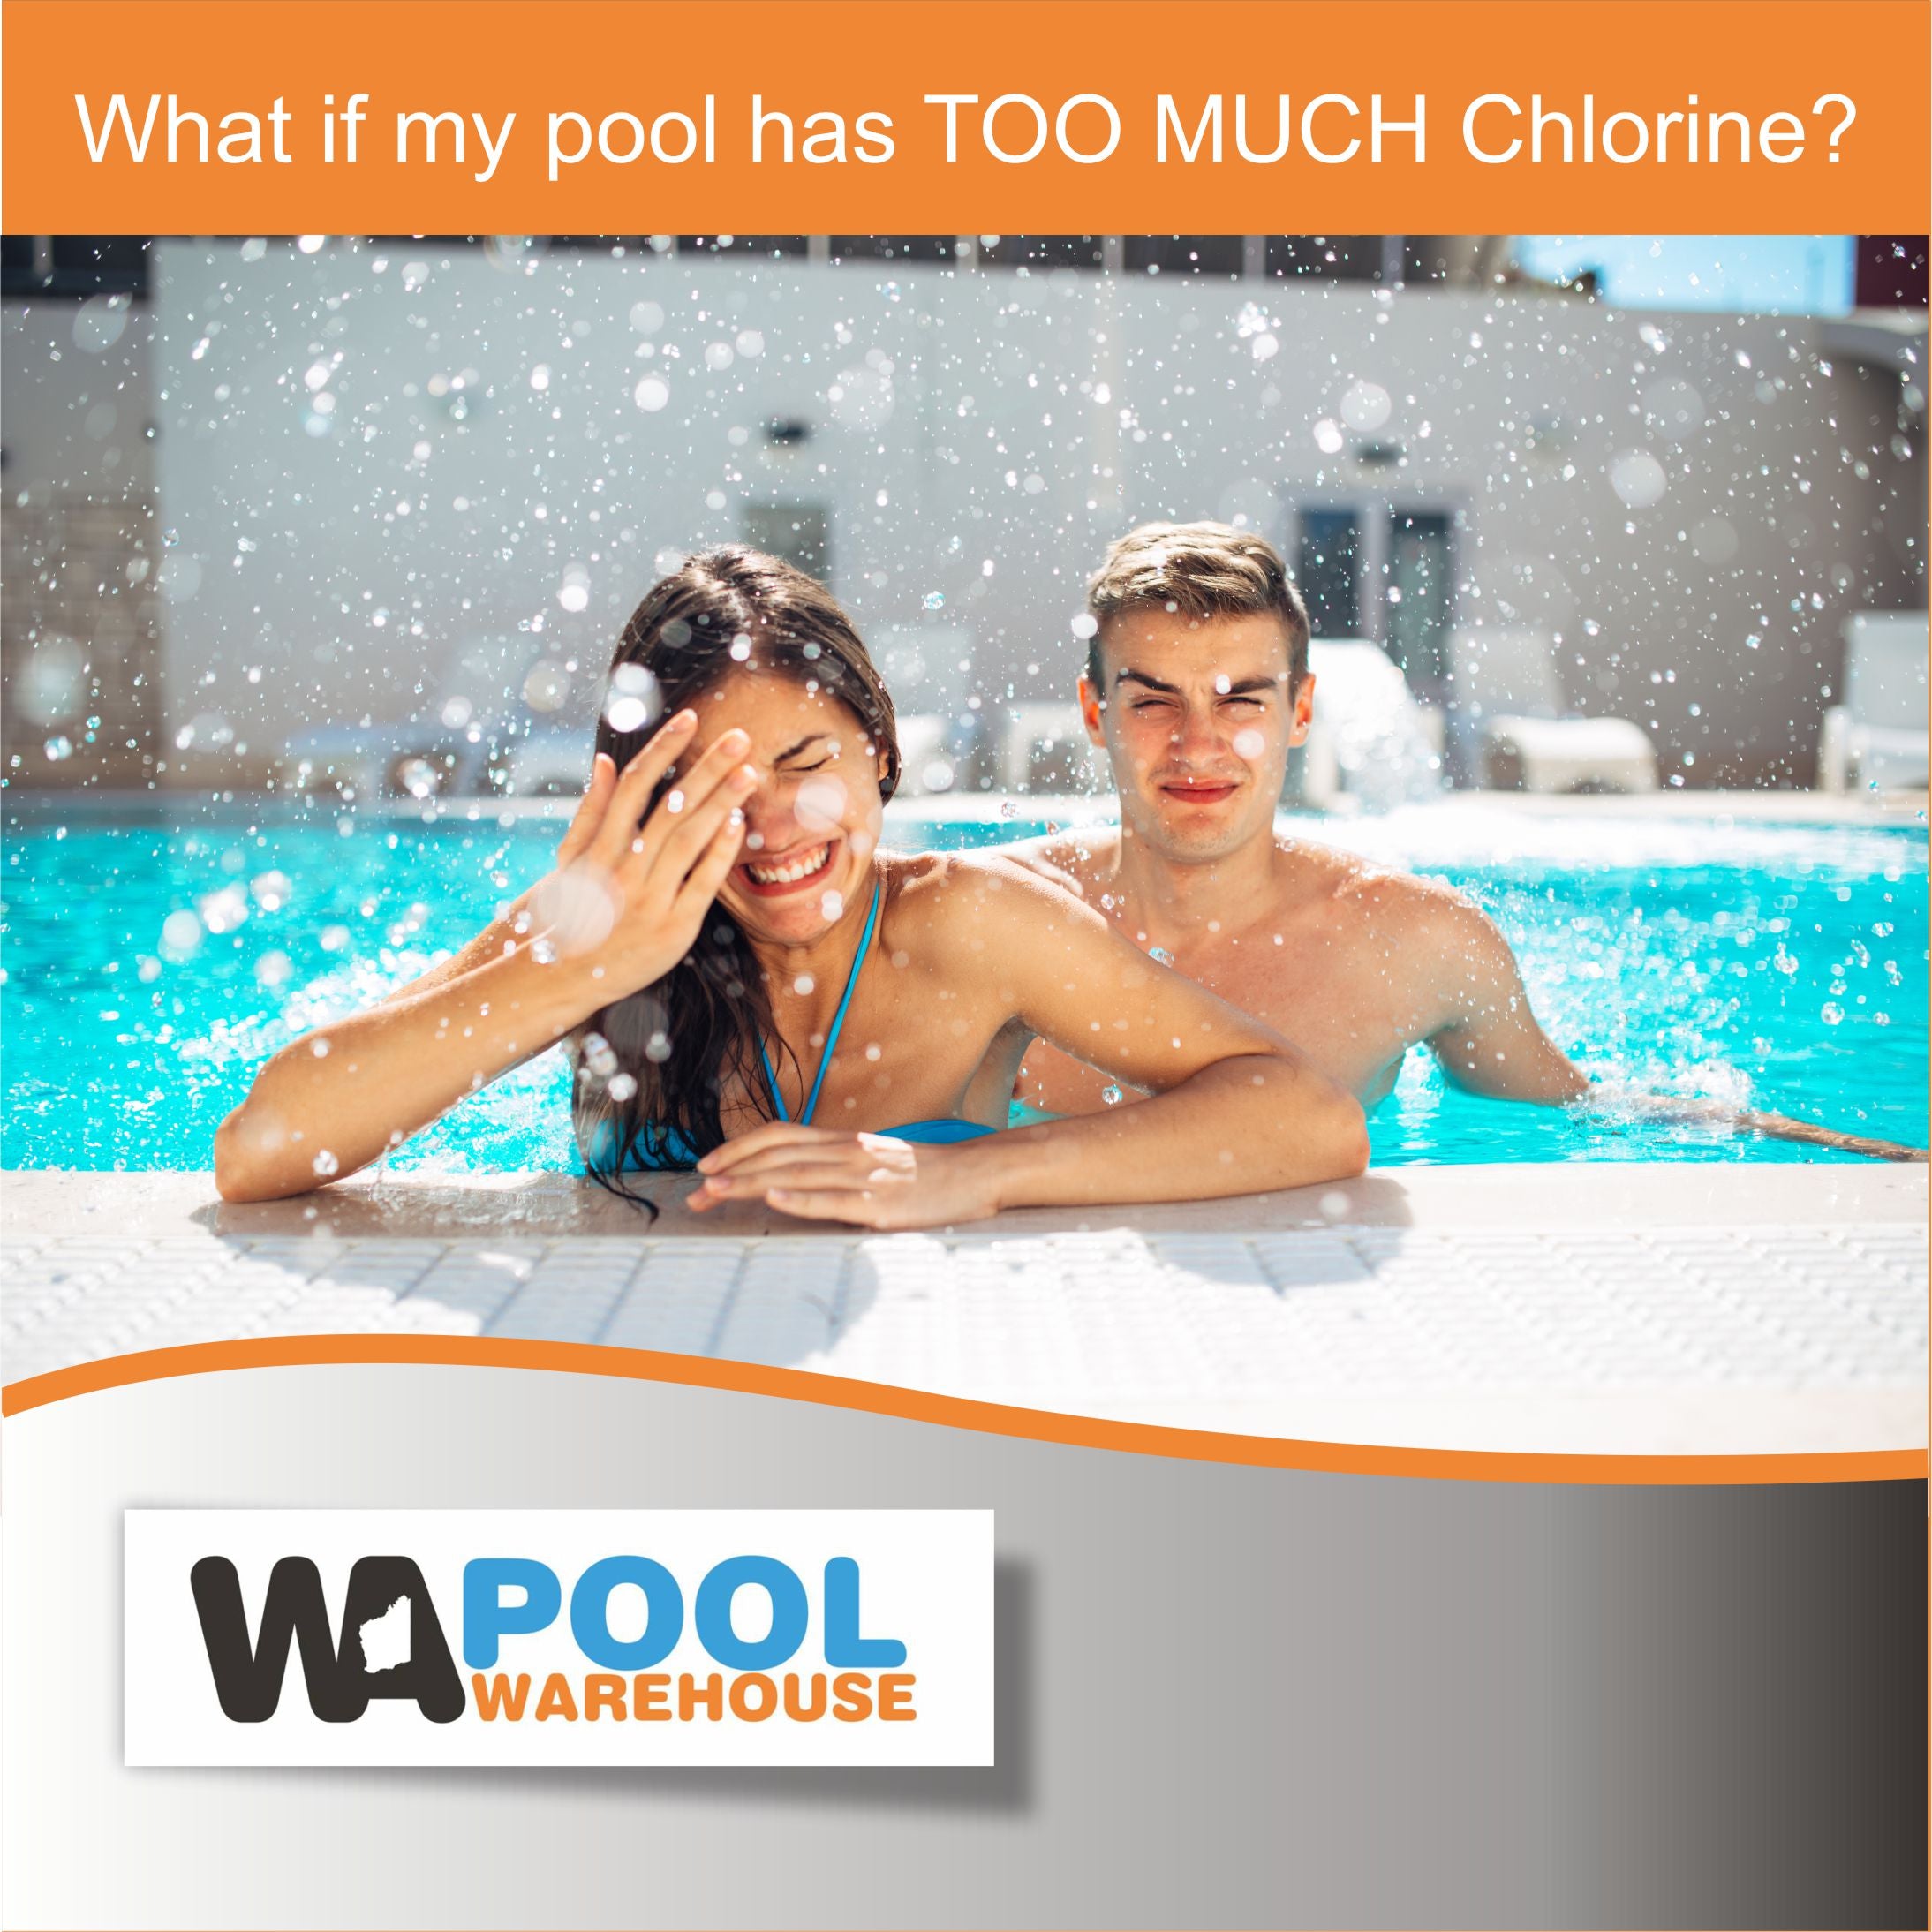 What are the repercussions of TOO MUCH Chlorine?